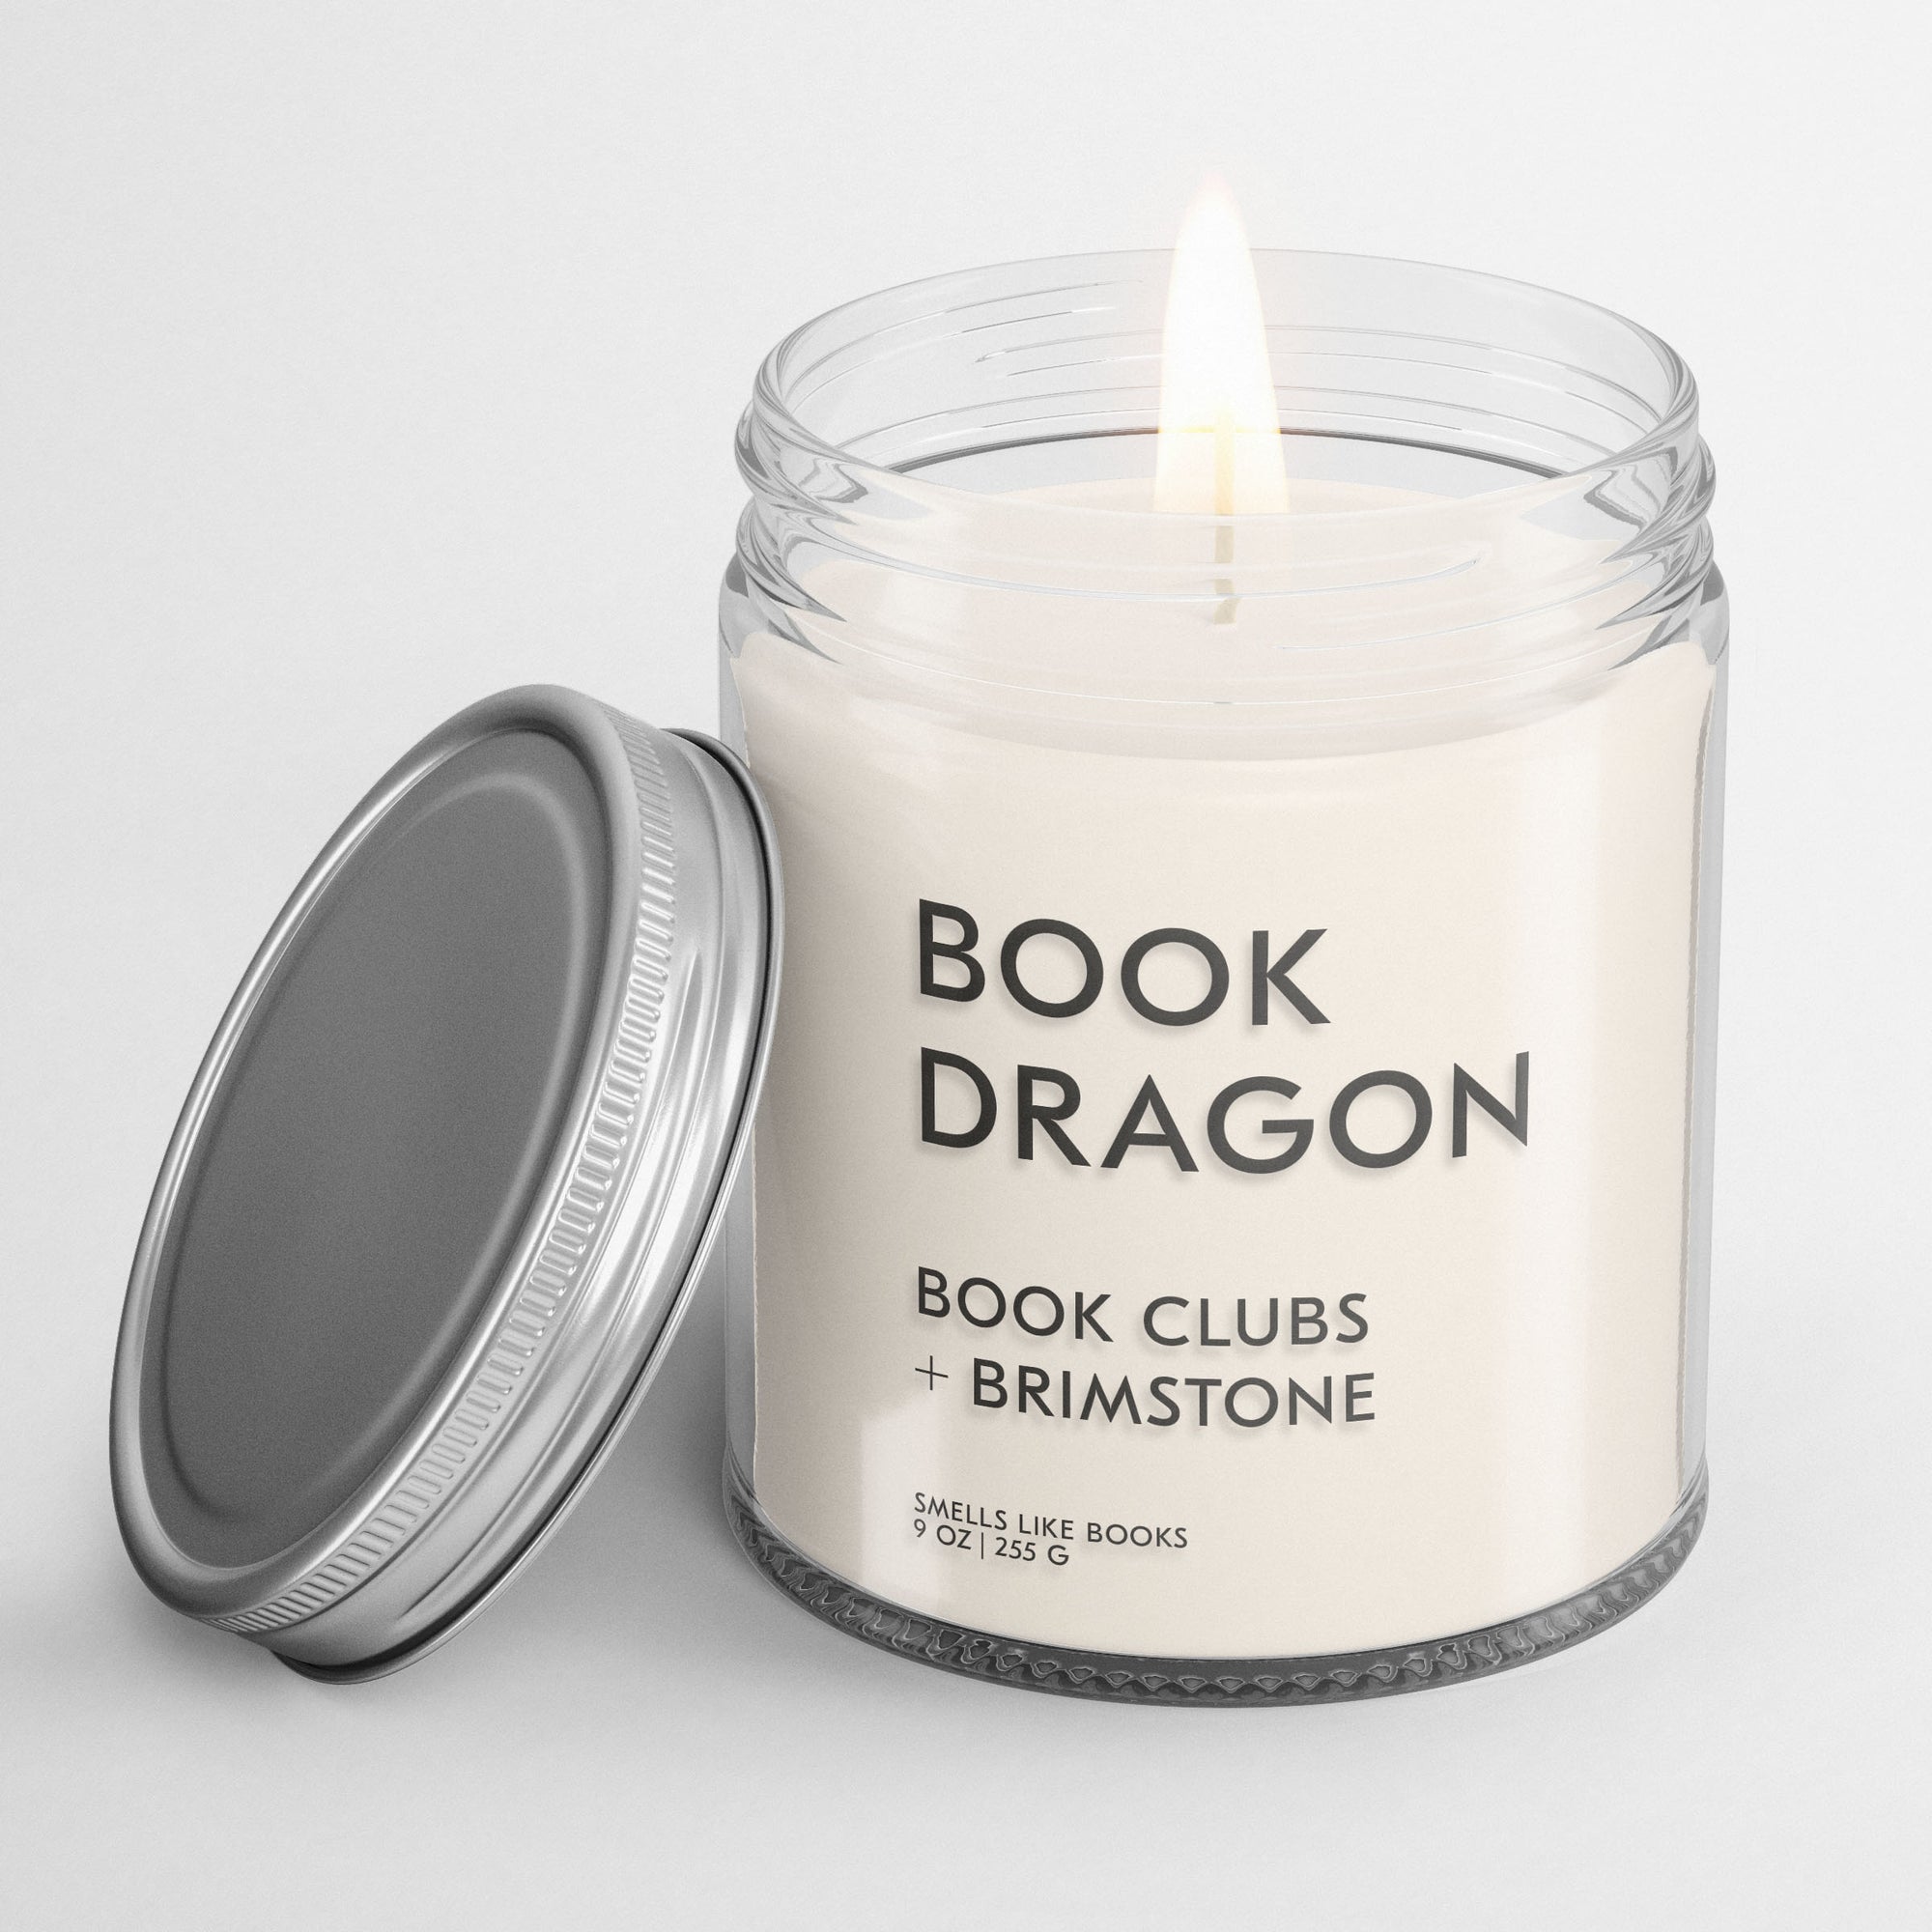 book inspired soy candle Smells Like Books BOOK DRAGON